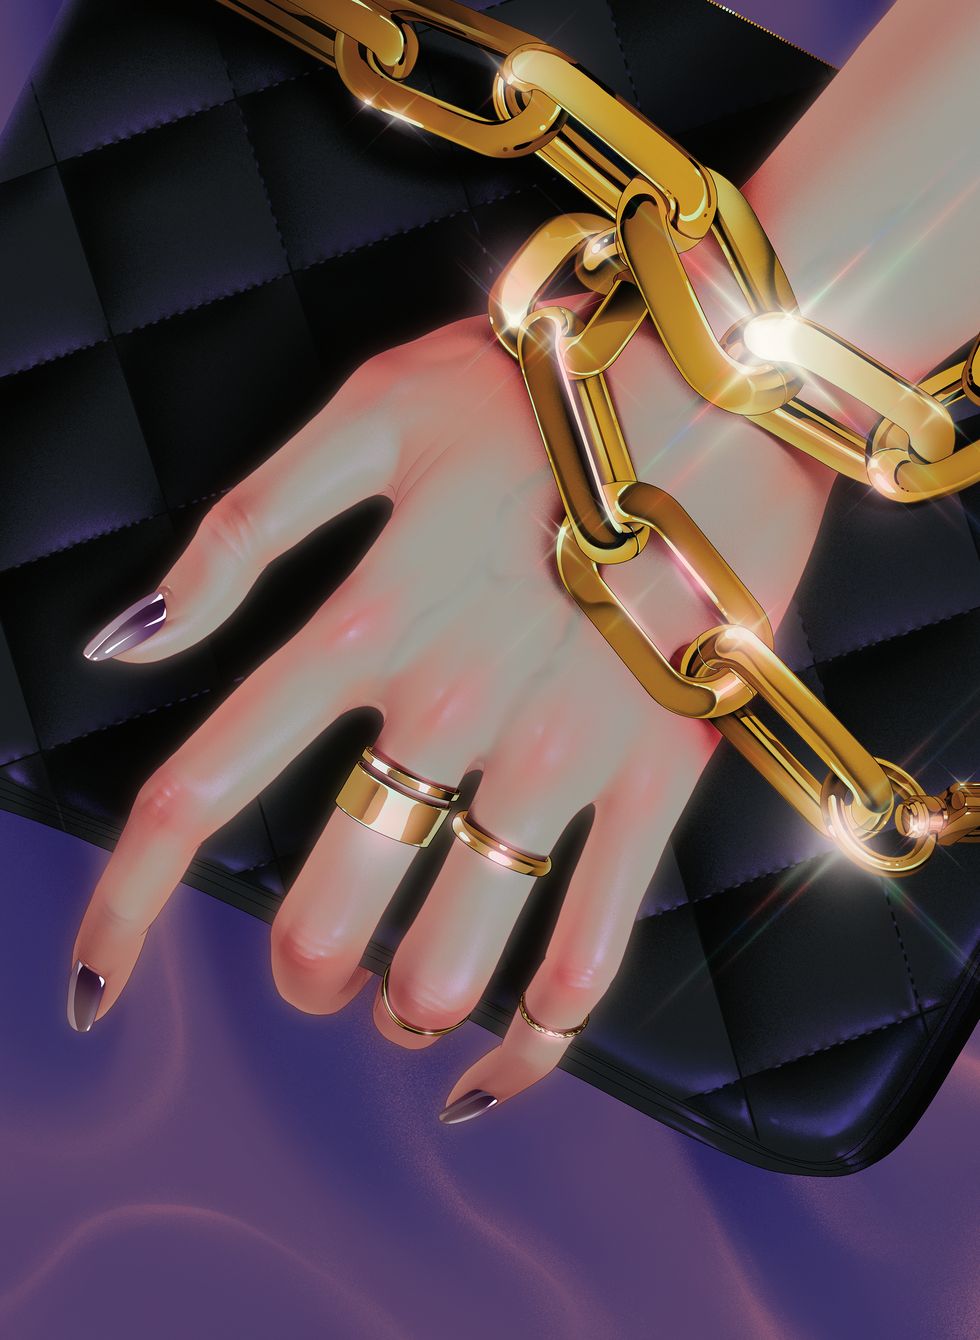 golden handcuffs\, hands chained\, worklife balance\, gilded cage\, wall street\, career\, power dynamics\, money\, wealth disparity\, power struggle, manipulation